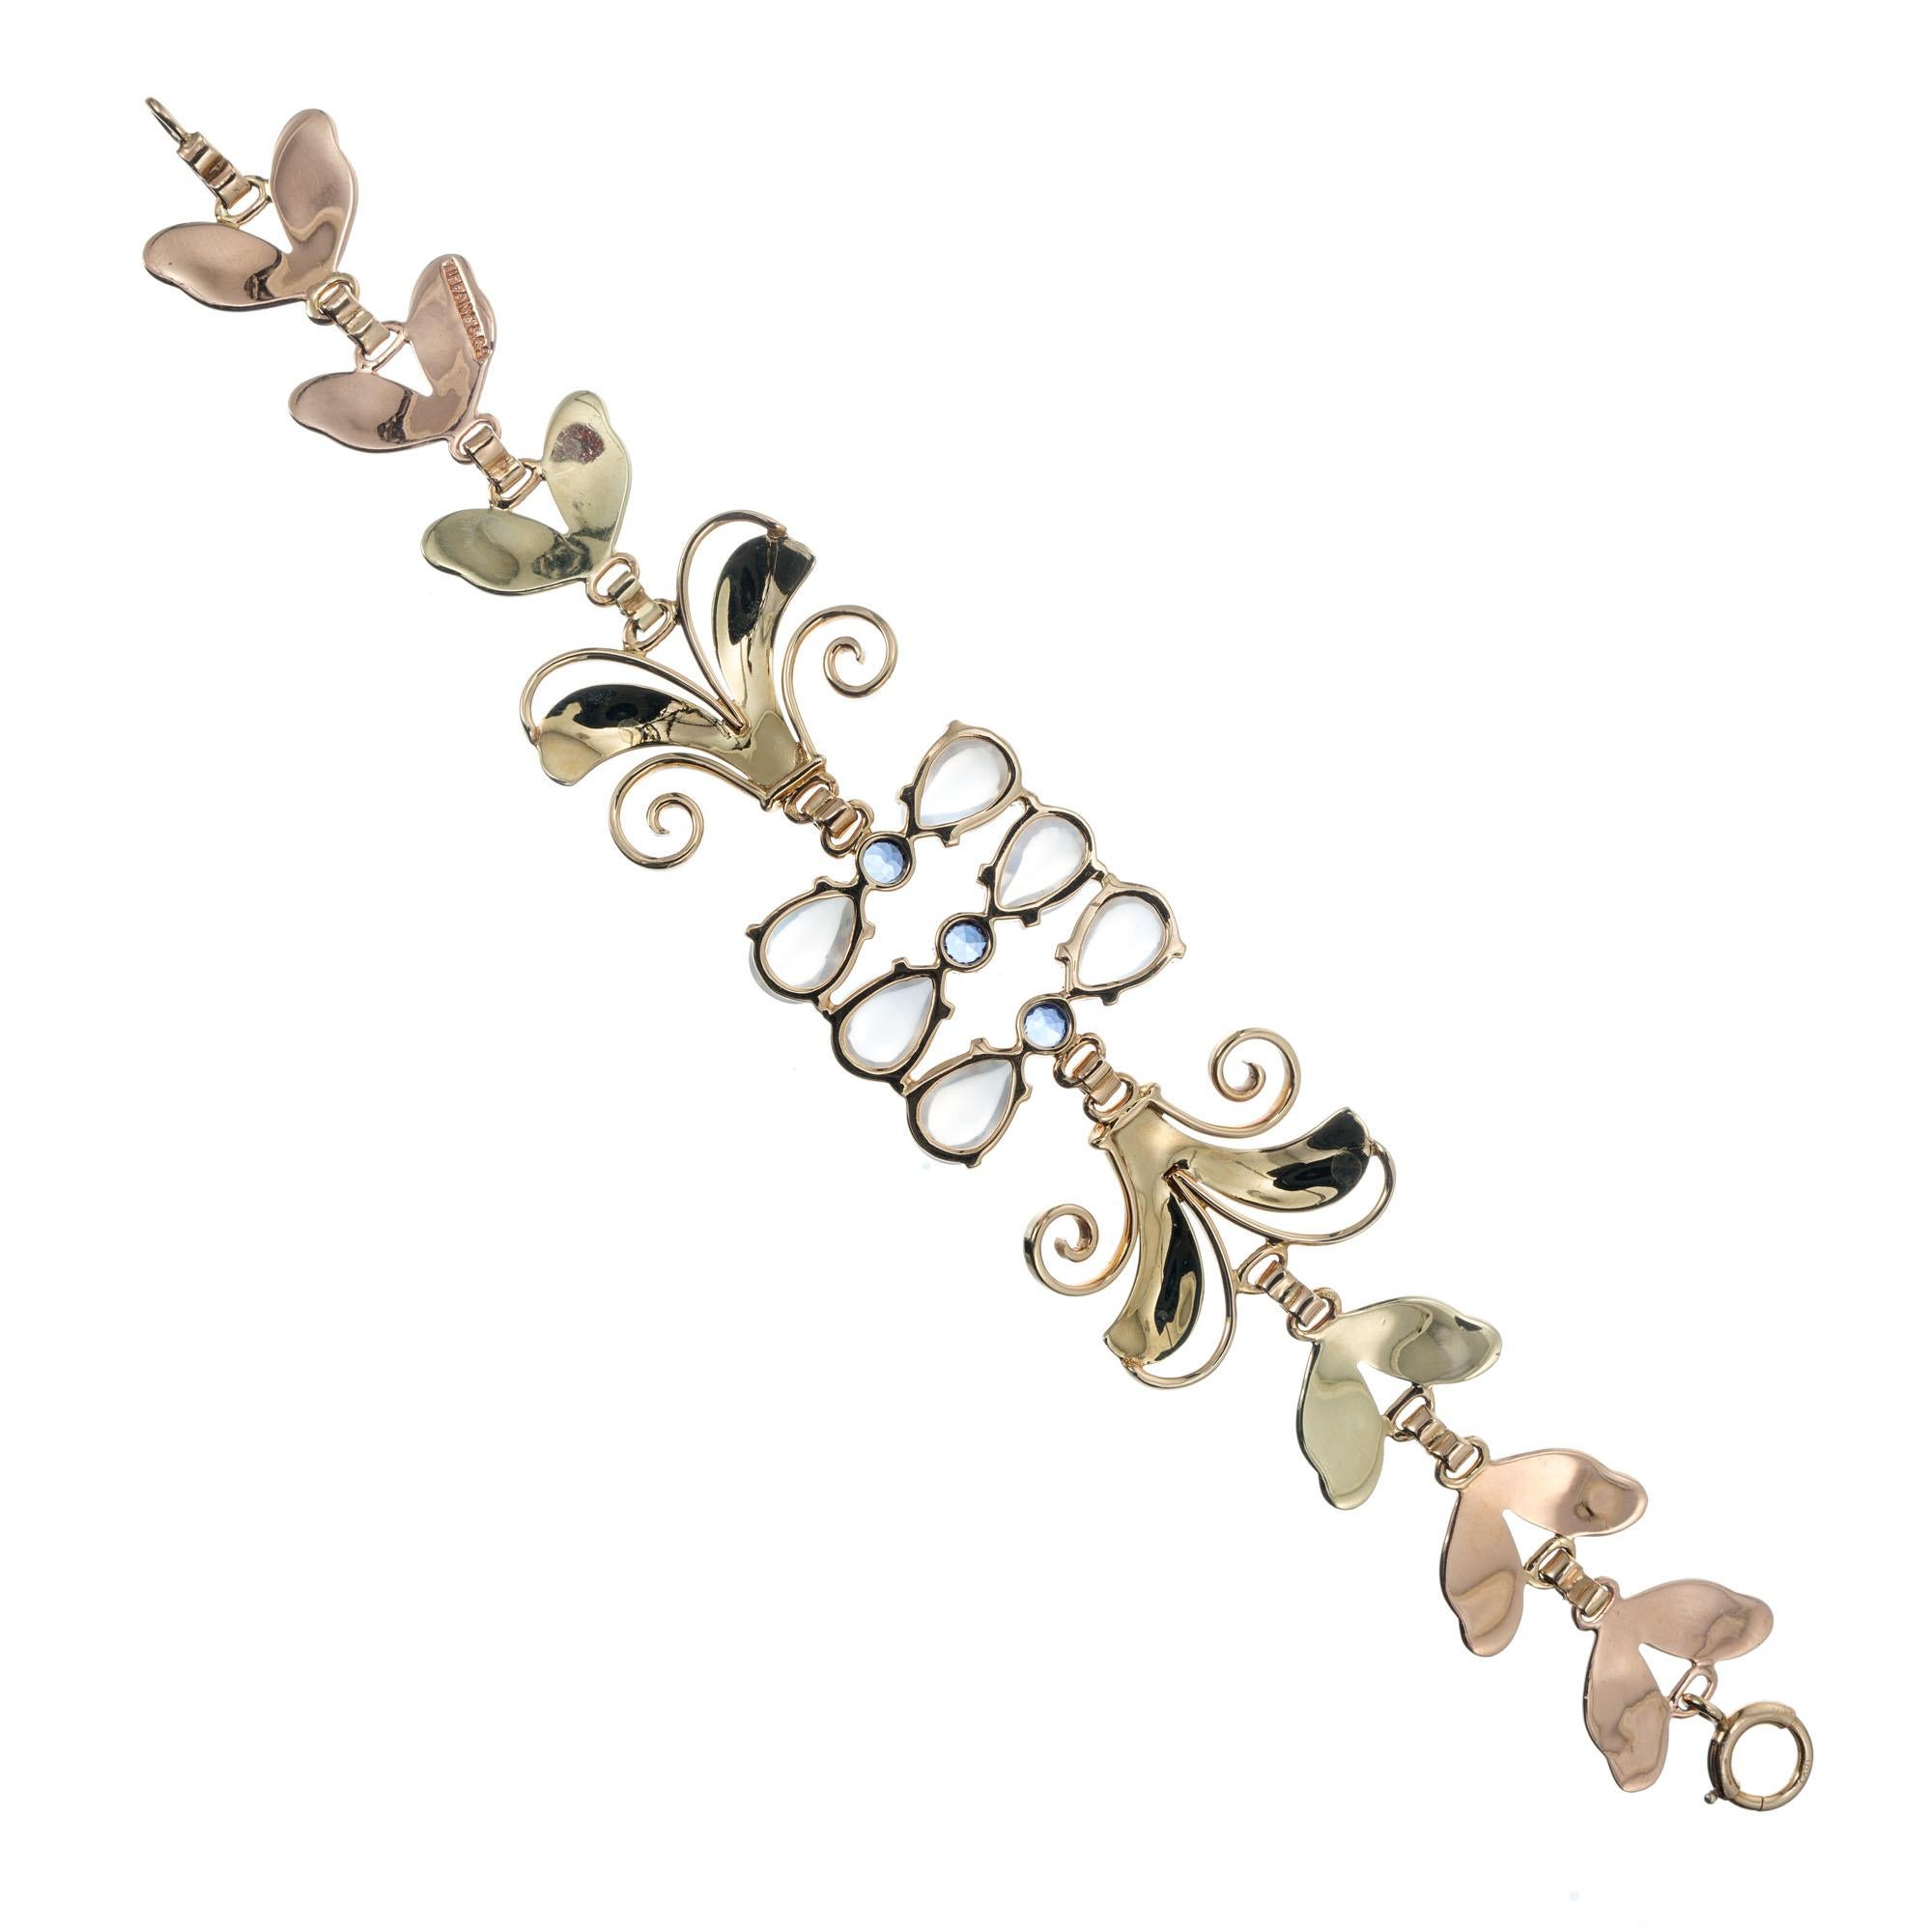 1940's Tiffany & Co rose and green gold Retro Art Deco sapphire and moonstone bracelet.  6 pear shaped Moonstones spaced by 3 round natural Montana Sapphires. 7.25 inches in length. 

14k rose and green gold 
3 round natural top gem blue Montana